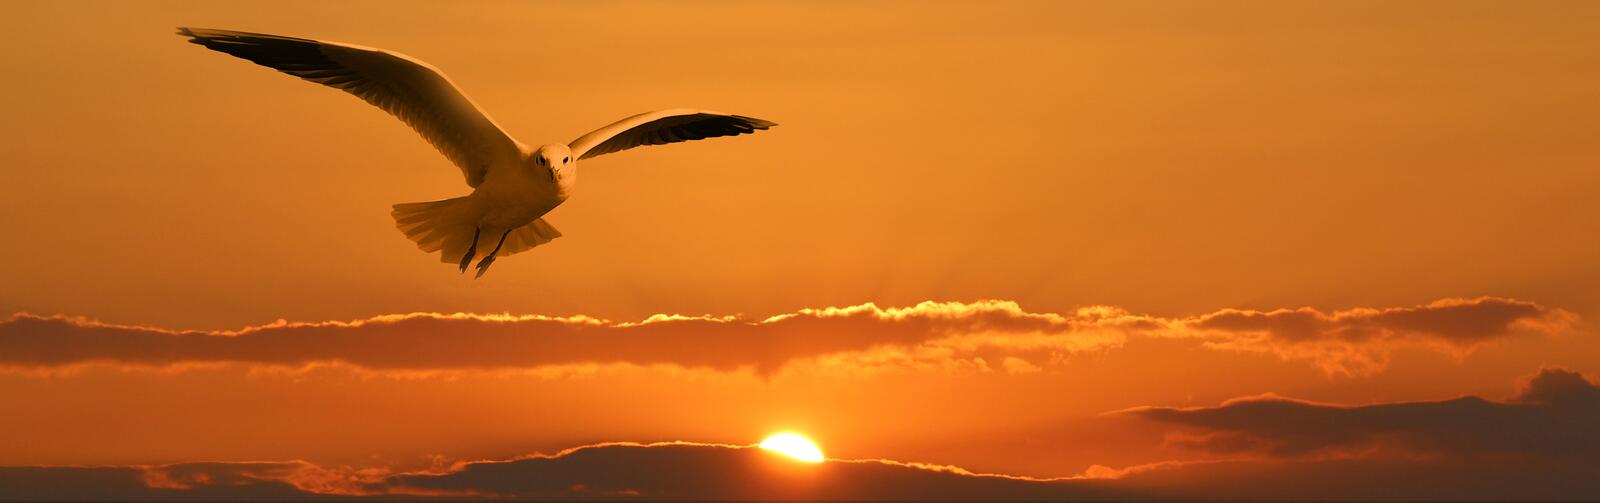 Wallpapers fly sunset seagull on the desktop